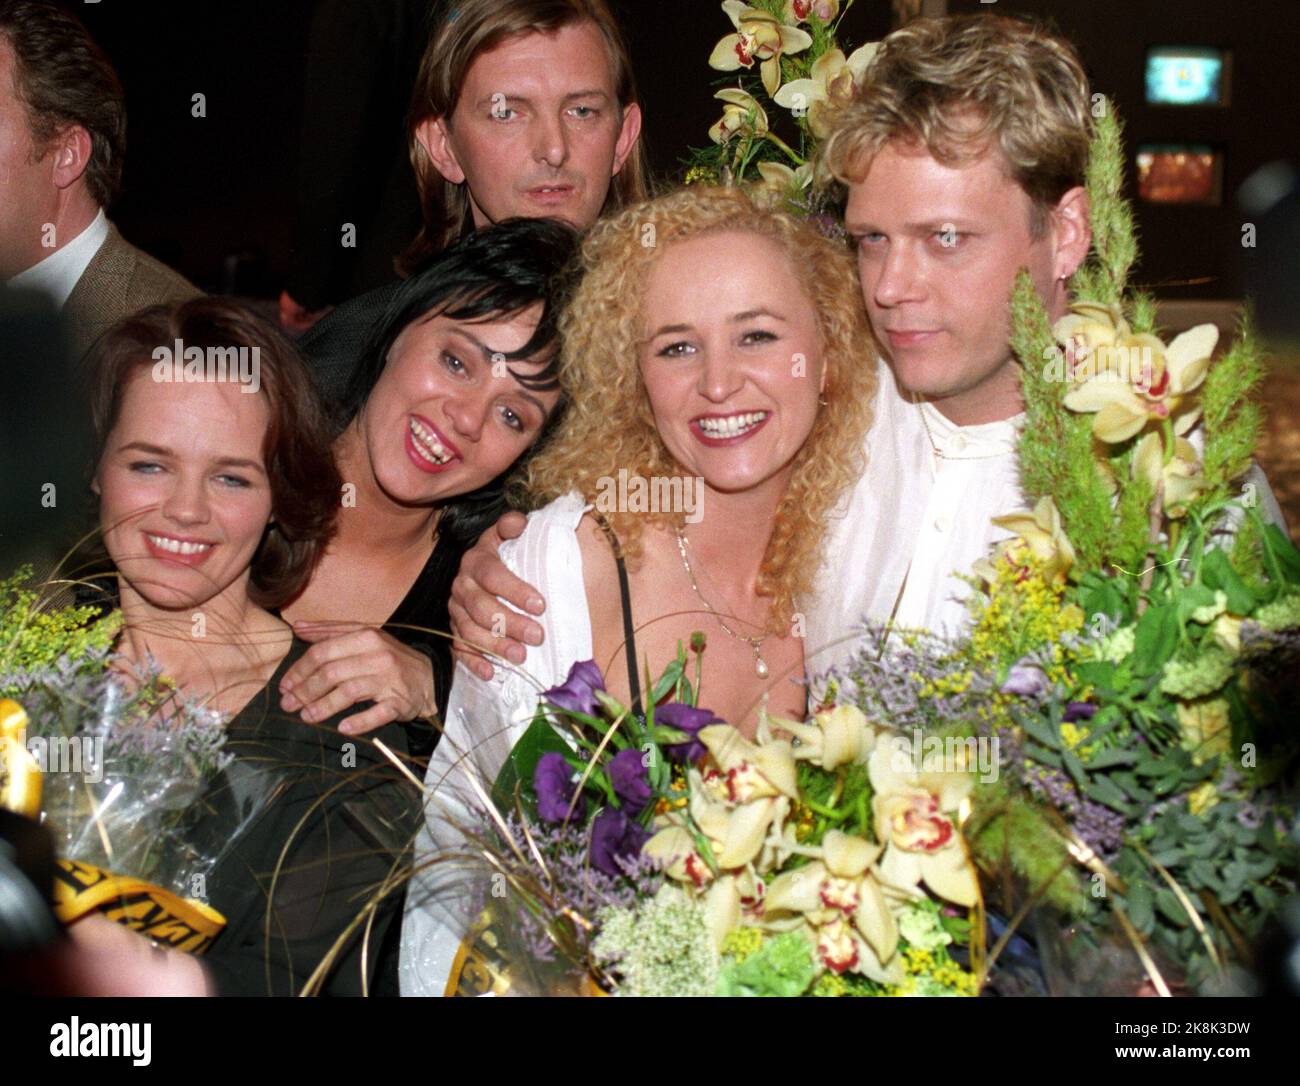 Dublin 19950513. Melody Grand Prix, the international final. Norwegian victory with the group Secret Garden and the Melody 'Nocturne'. Fionnuala Sherry and Rolf Løvland on stage after victory, with flowers etc. Photo: Per R. Løchen / NTB Stock Photo